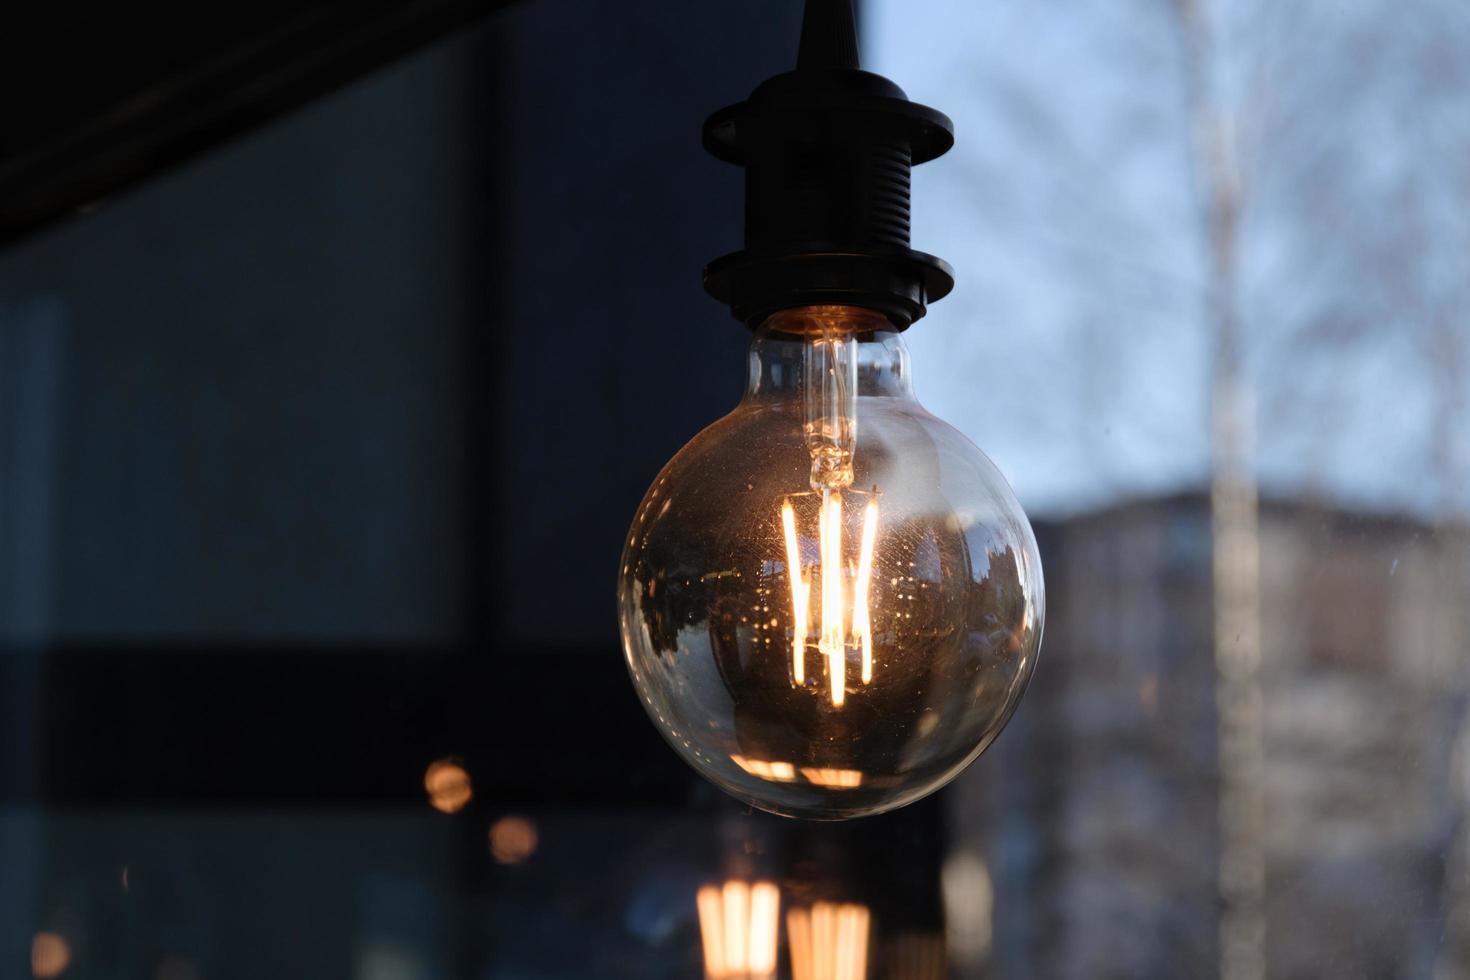 Closeup of a modern vintage-like Edison lamp hanging in the cafeteria photo